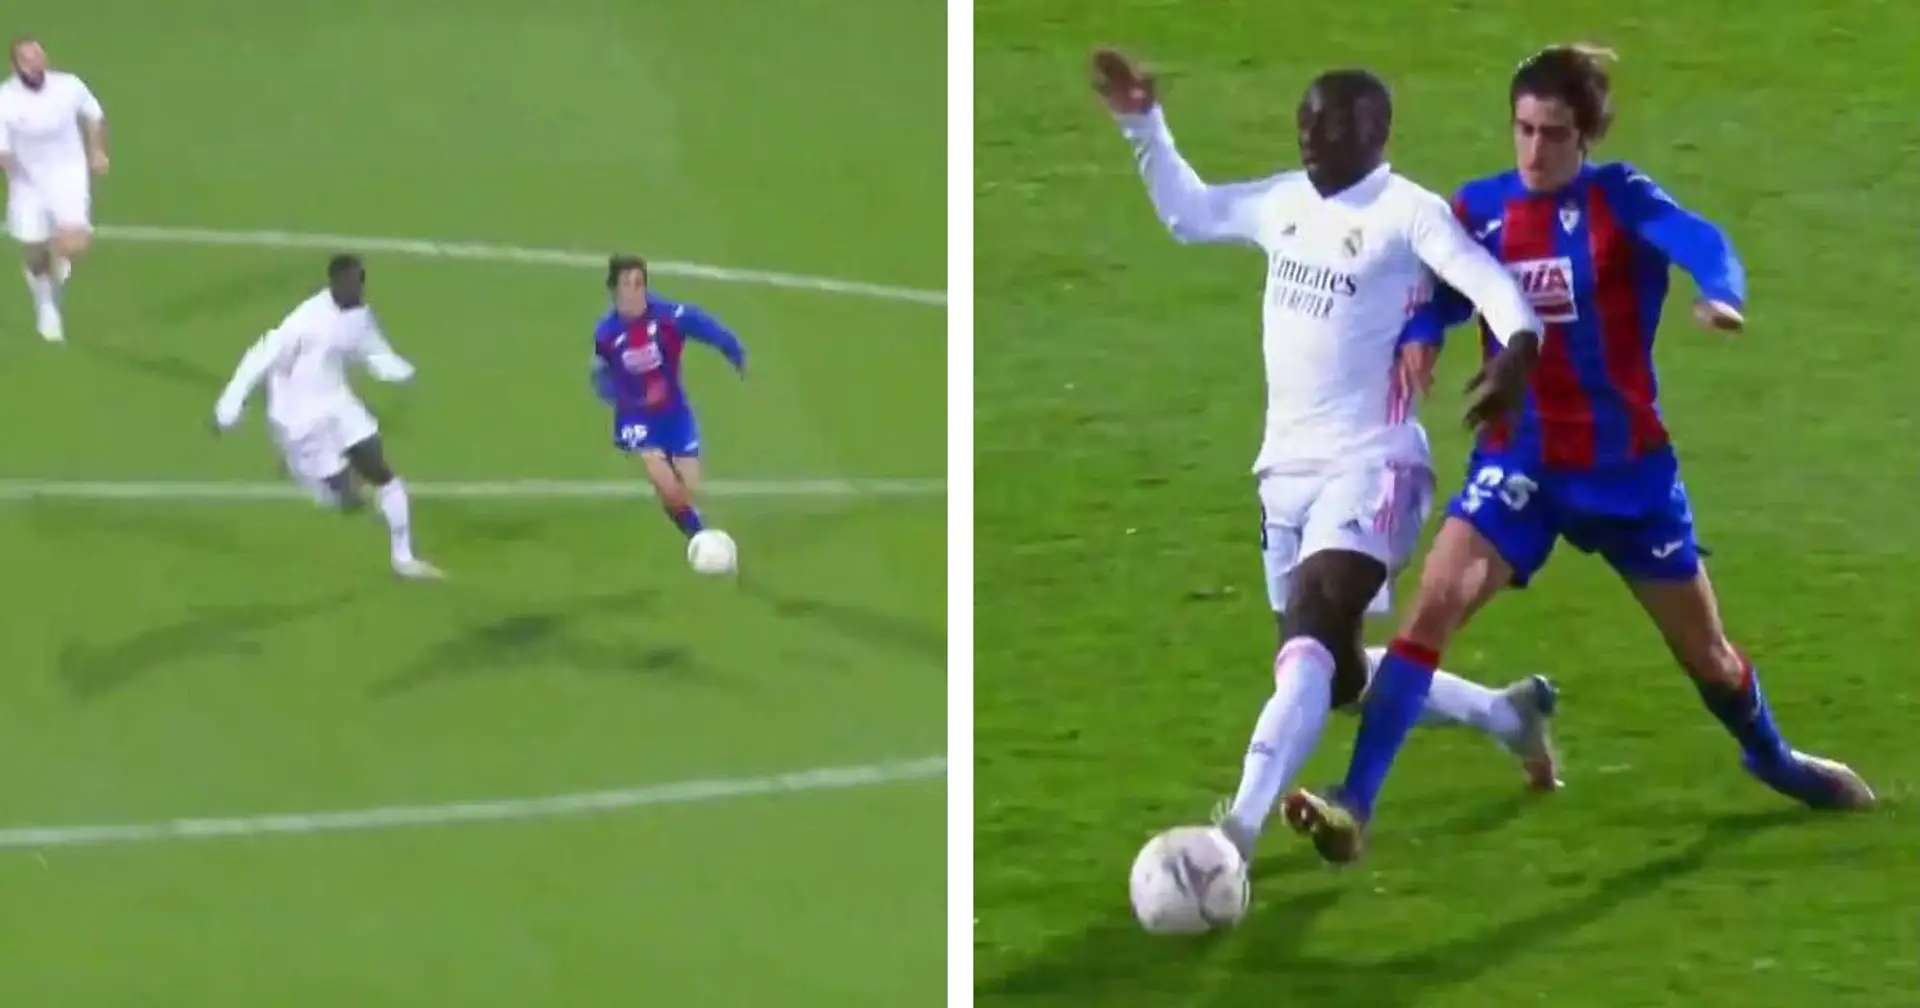 You shall not pass: Mendy with brilliant defending vs Eibar